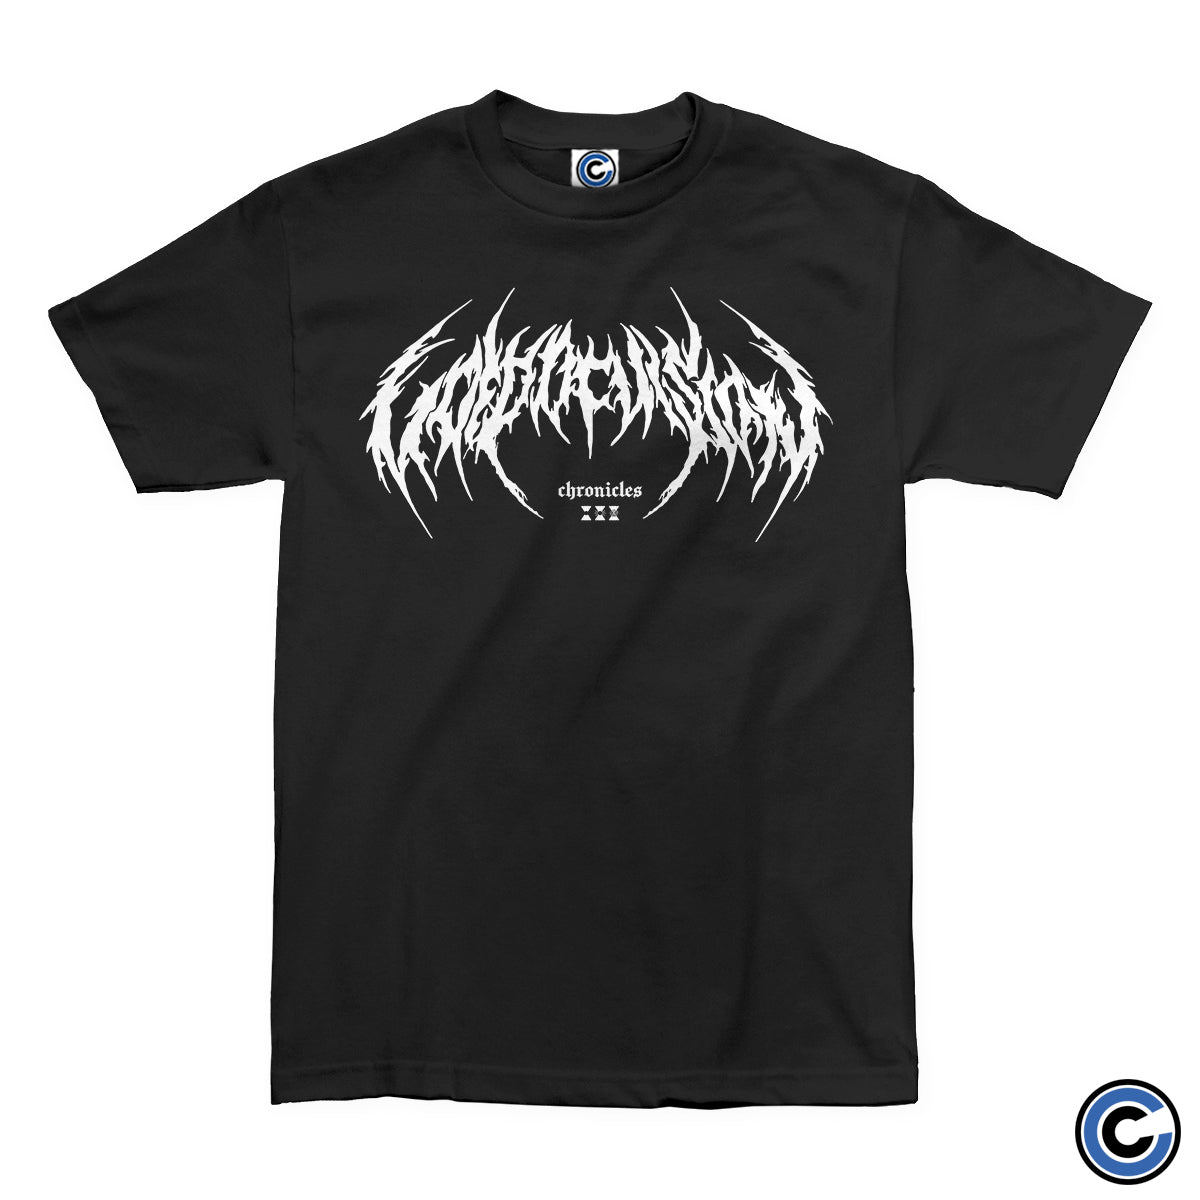 Void of Vision "Death Metal" Shirt